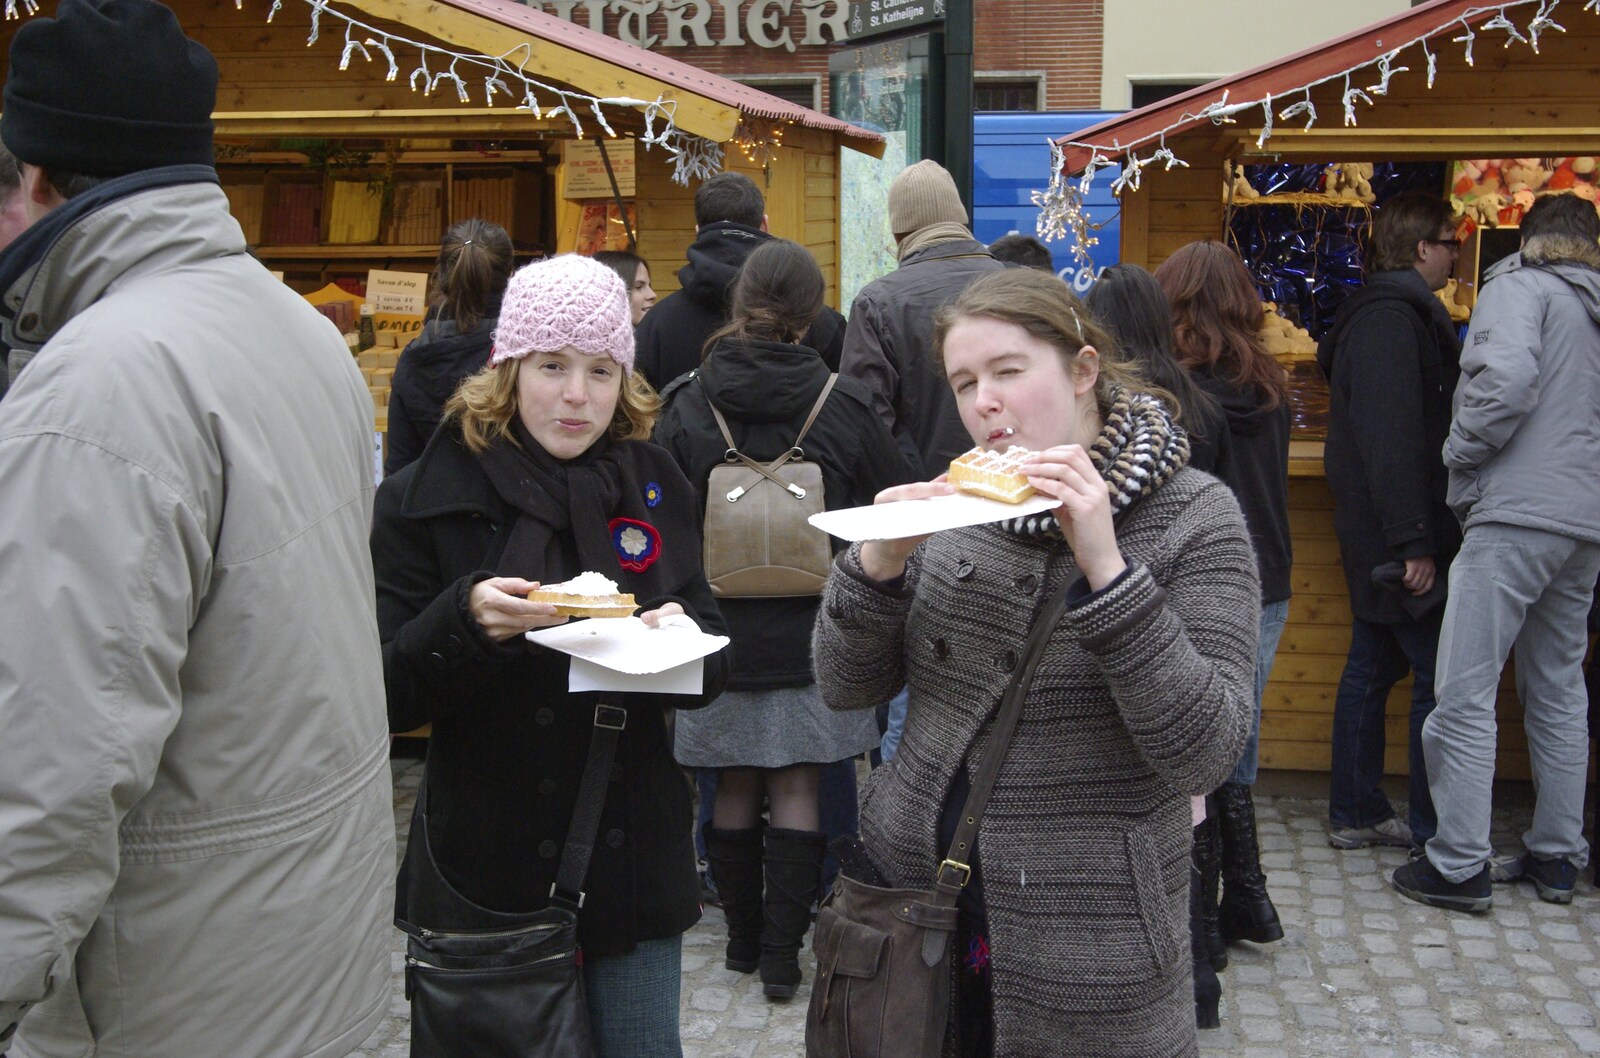 Jules and Isobel munch on waffles from The Christmas Markets of Brussels, Belgium - 1st January 2007